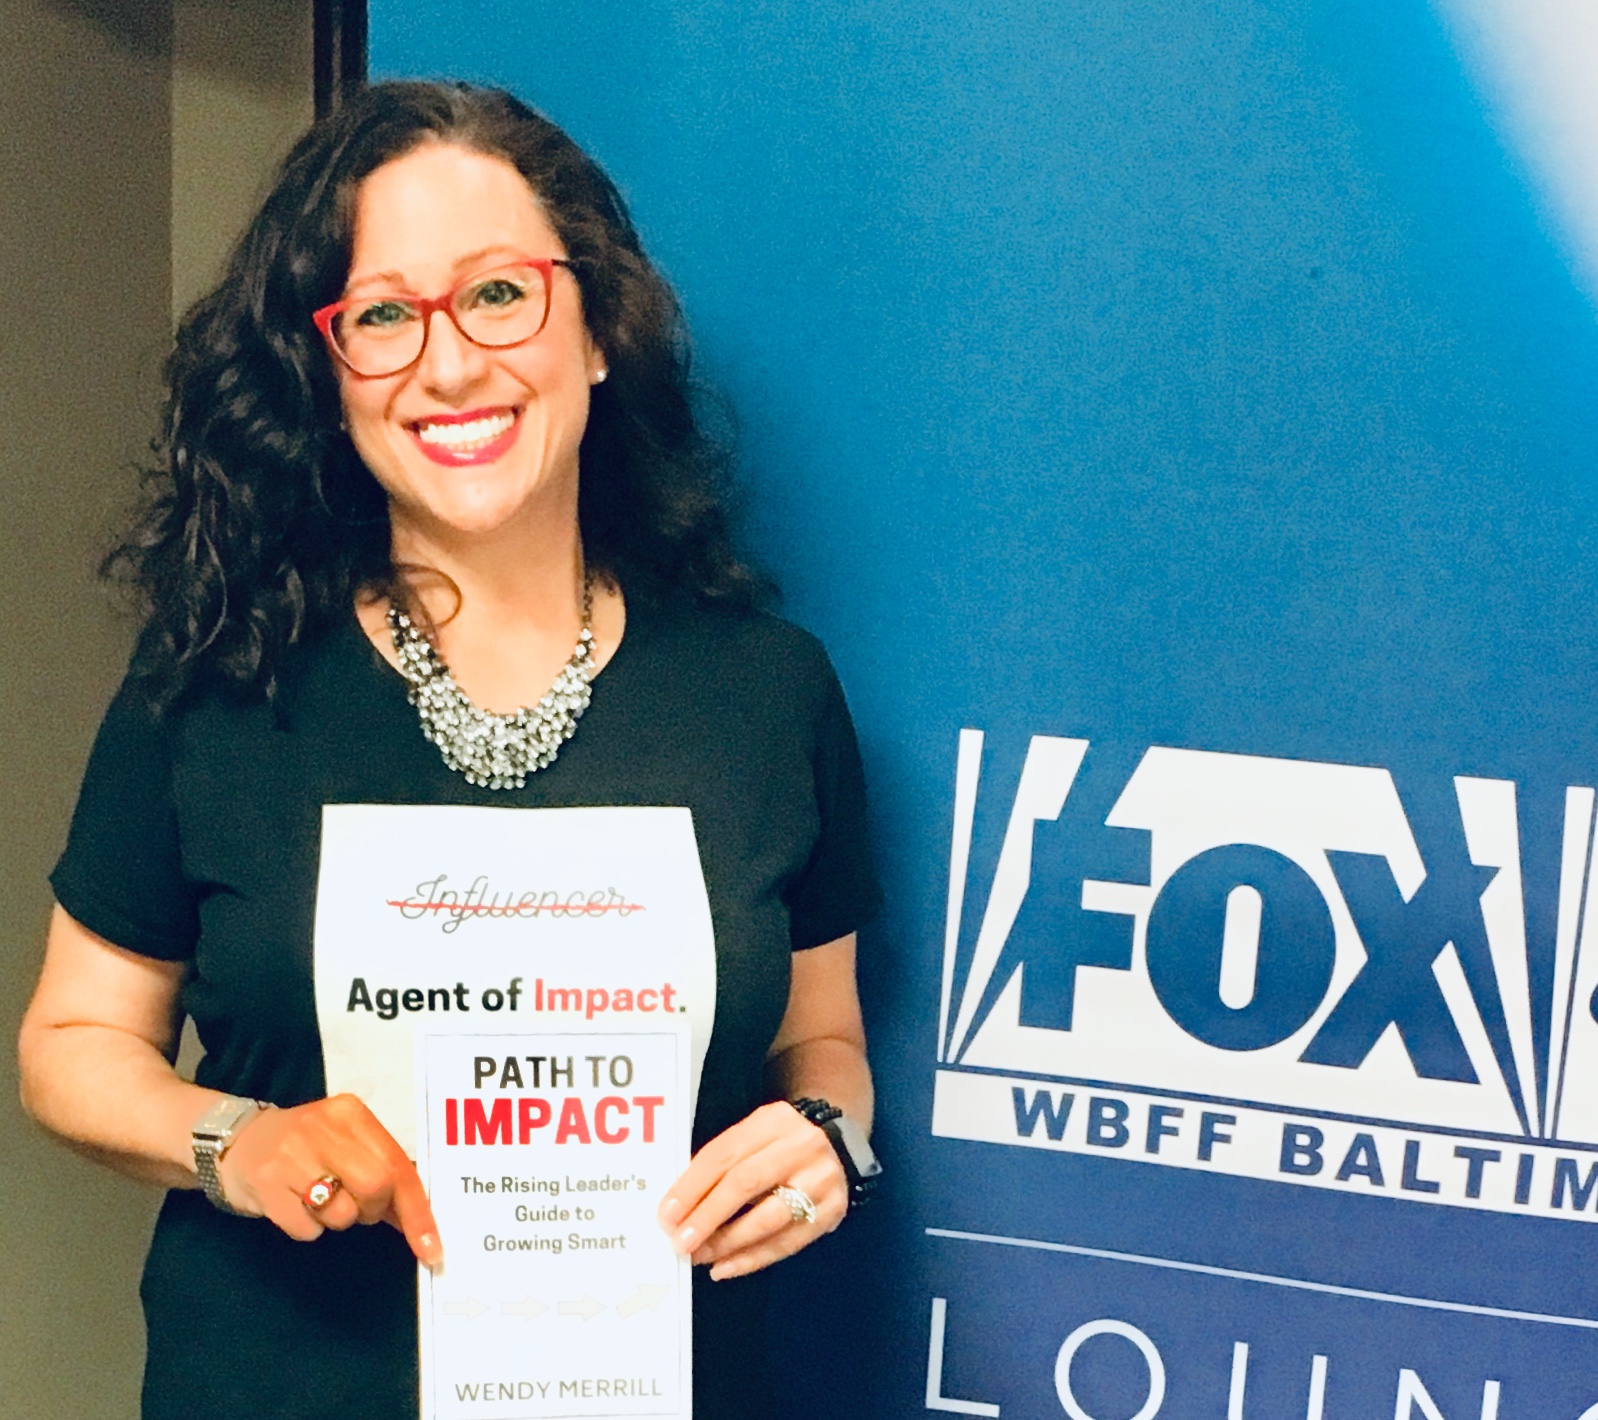 Wendy and her new book, "Path to Impact."